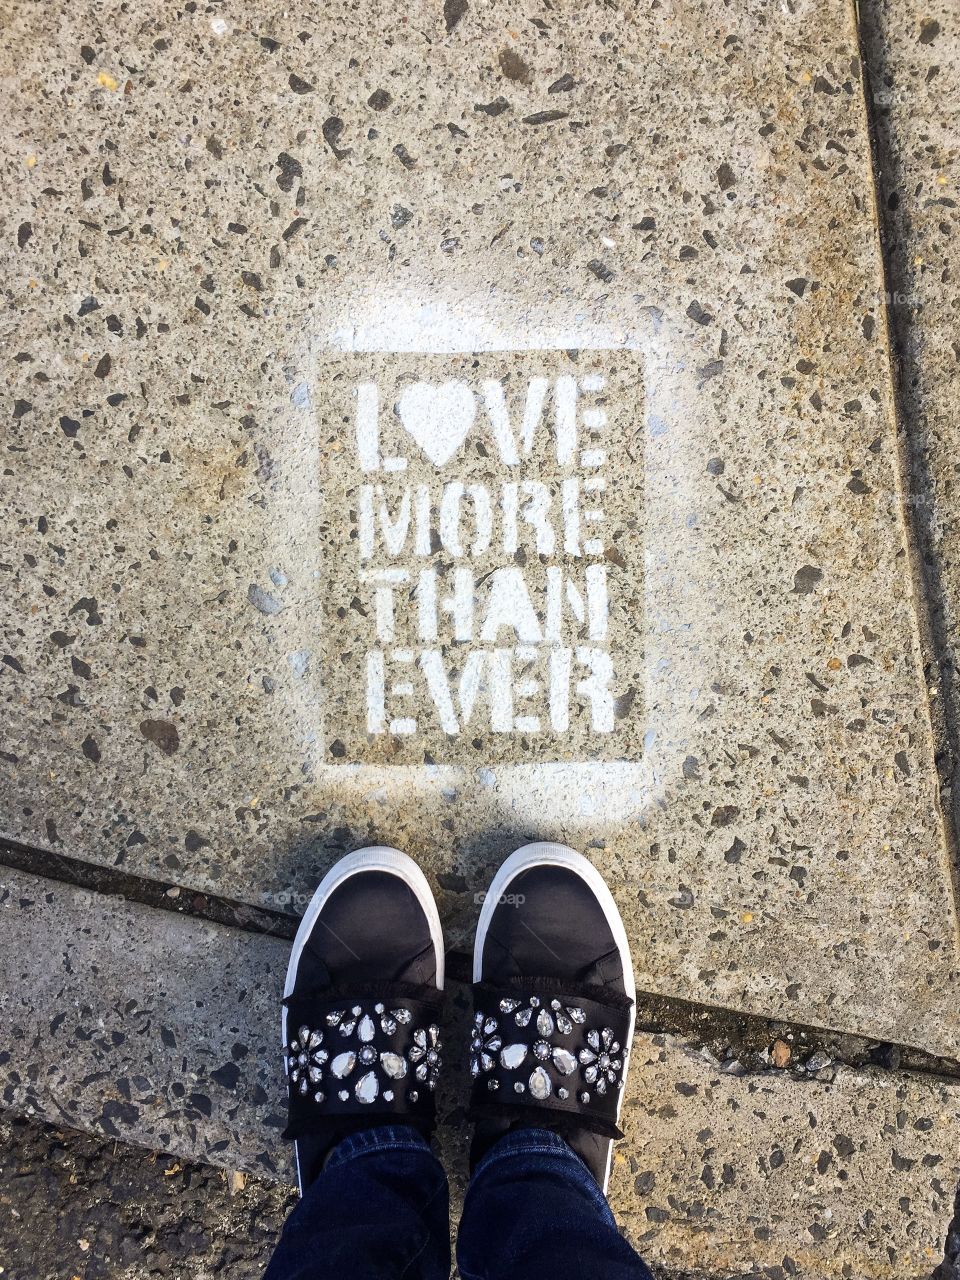 Graffiti in city. Looking down to stylish woman shoes. Love Inscription. Love more than ever.